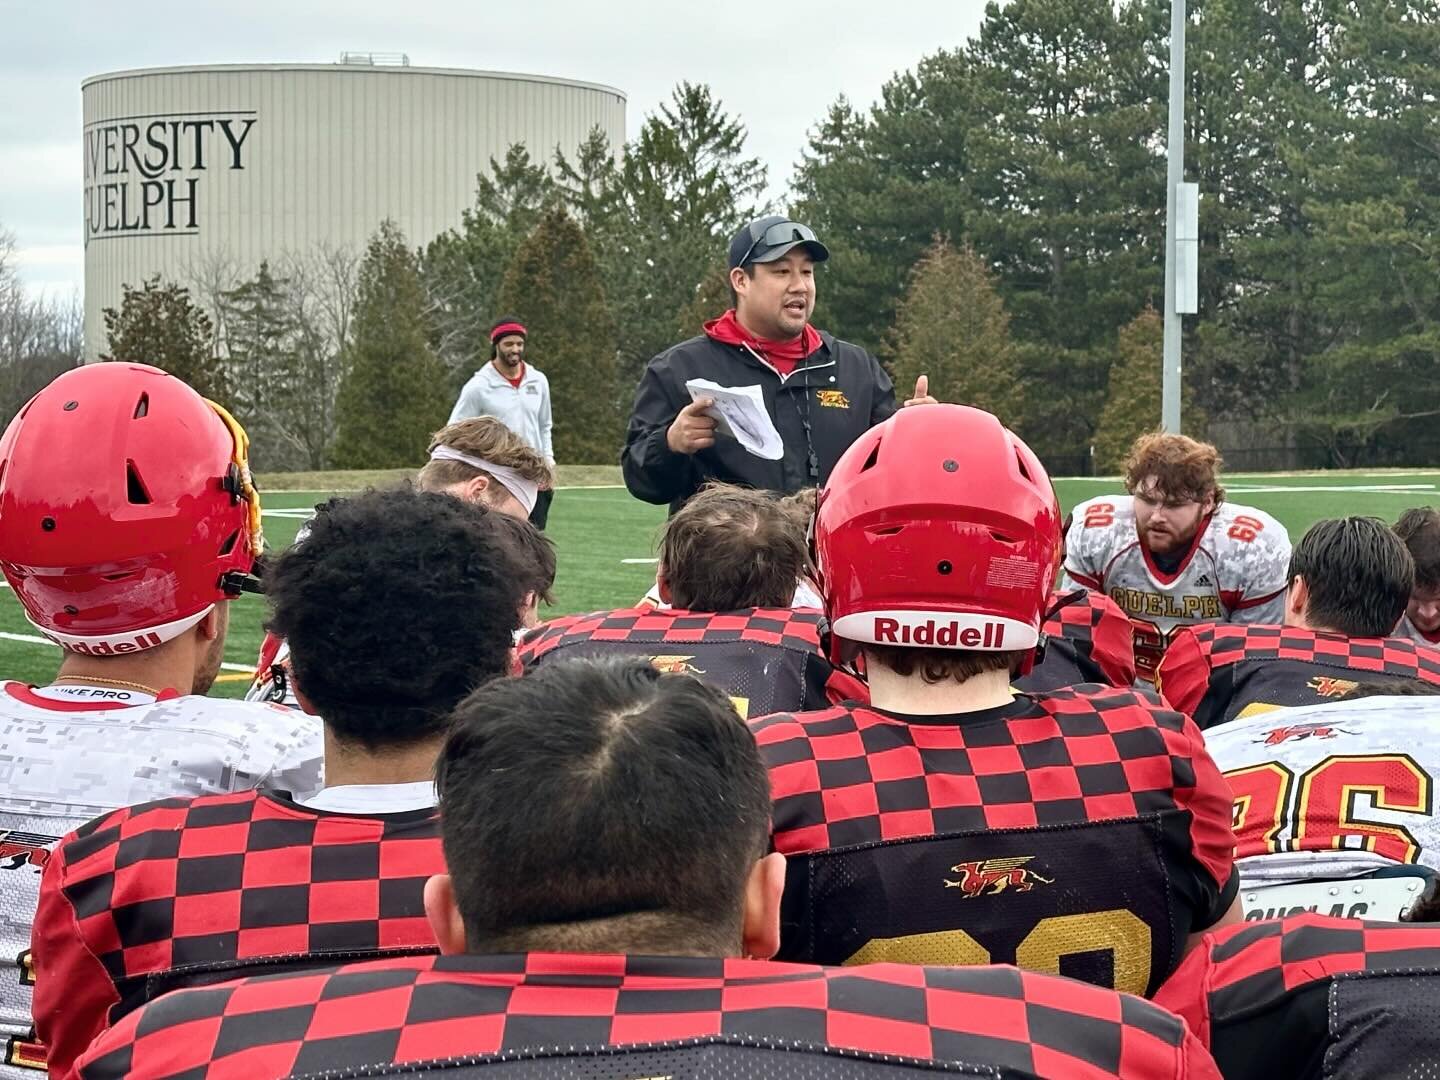 ‼️Attention Gryphon Nation! Spring has arrived, and with it comes the sound of footballs flying through the air. 🏈💨Today, the Gryphons geared up for spring practices on the Varsity Field. 🧨Exciting news also circulates about another league-leading